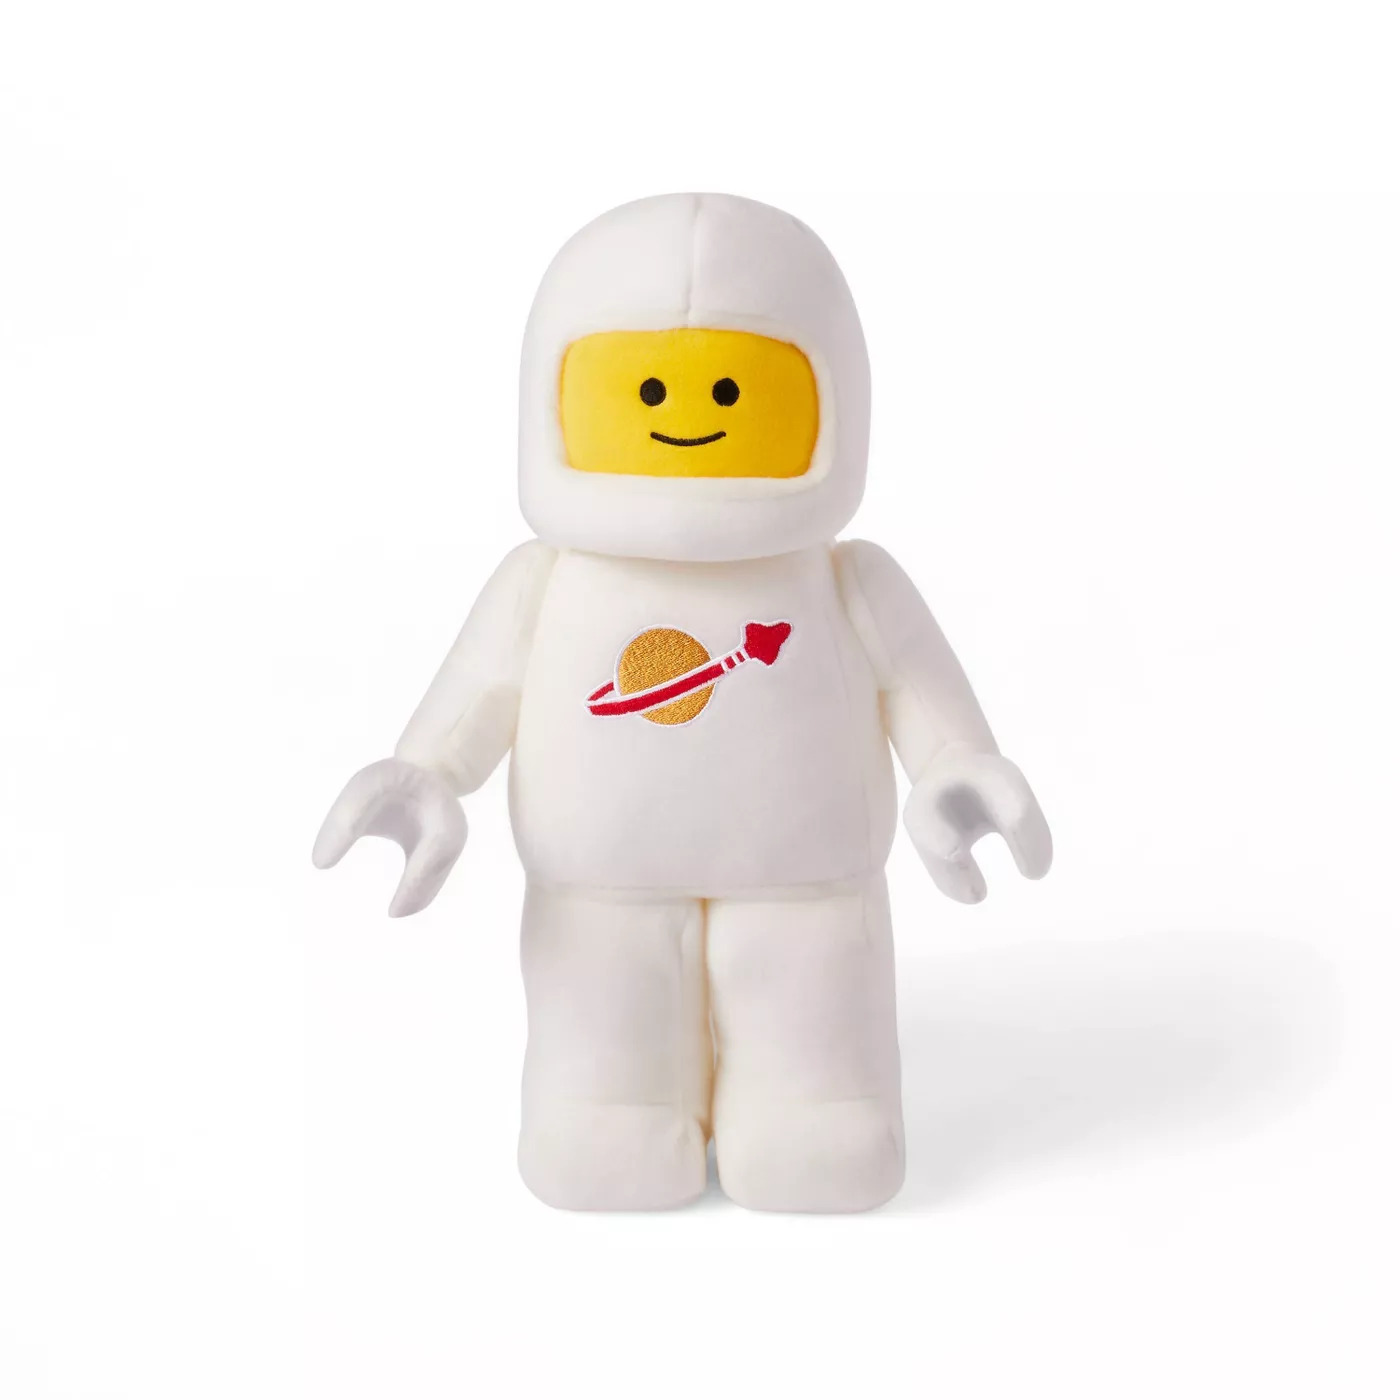 LEGO Collection X Target Fun in Space Astronaut Jigsaw Puzzle 500